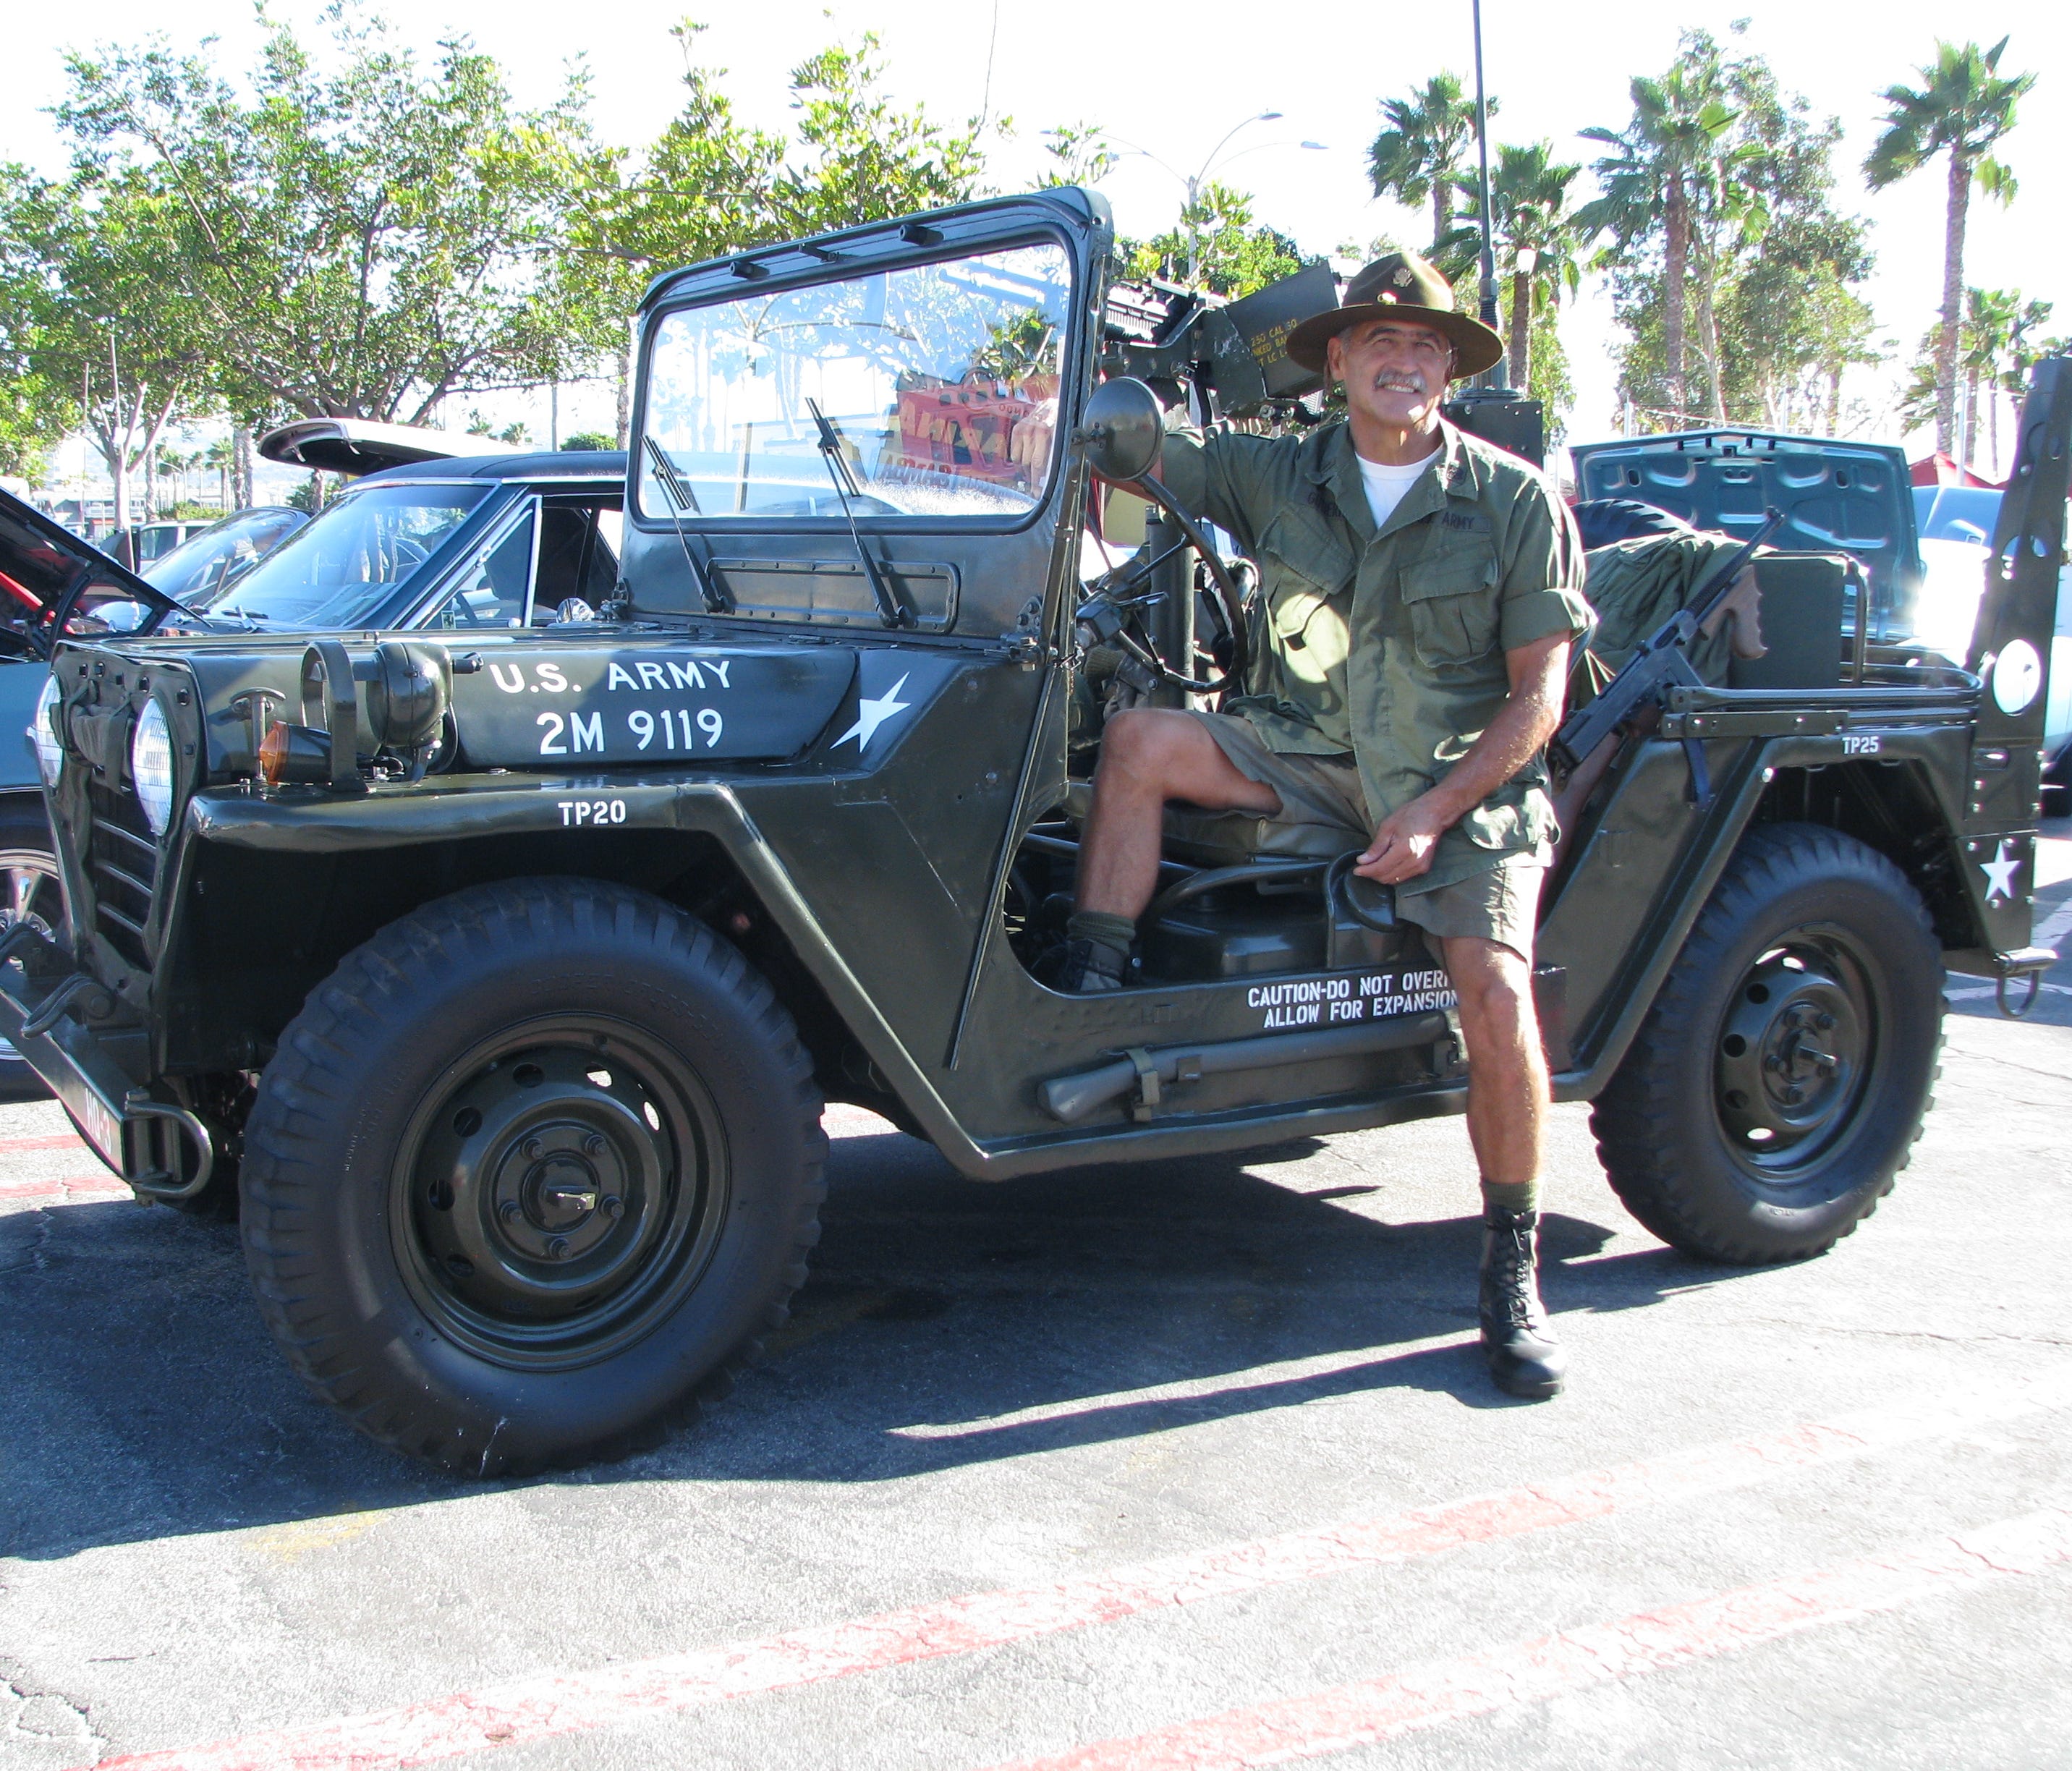 Carl Gutierrez of Rancho Palos Verdes, Calif., shows off his M151A1, a MUTT. His is a 1966 model, a tribute to those who served in civil defense in the Vietnam era.